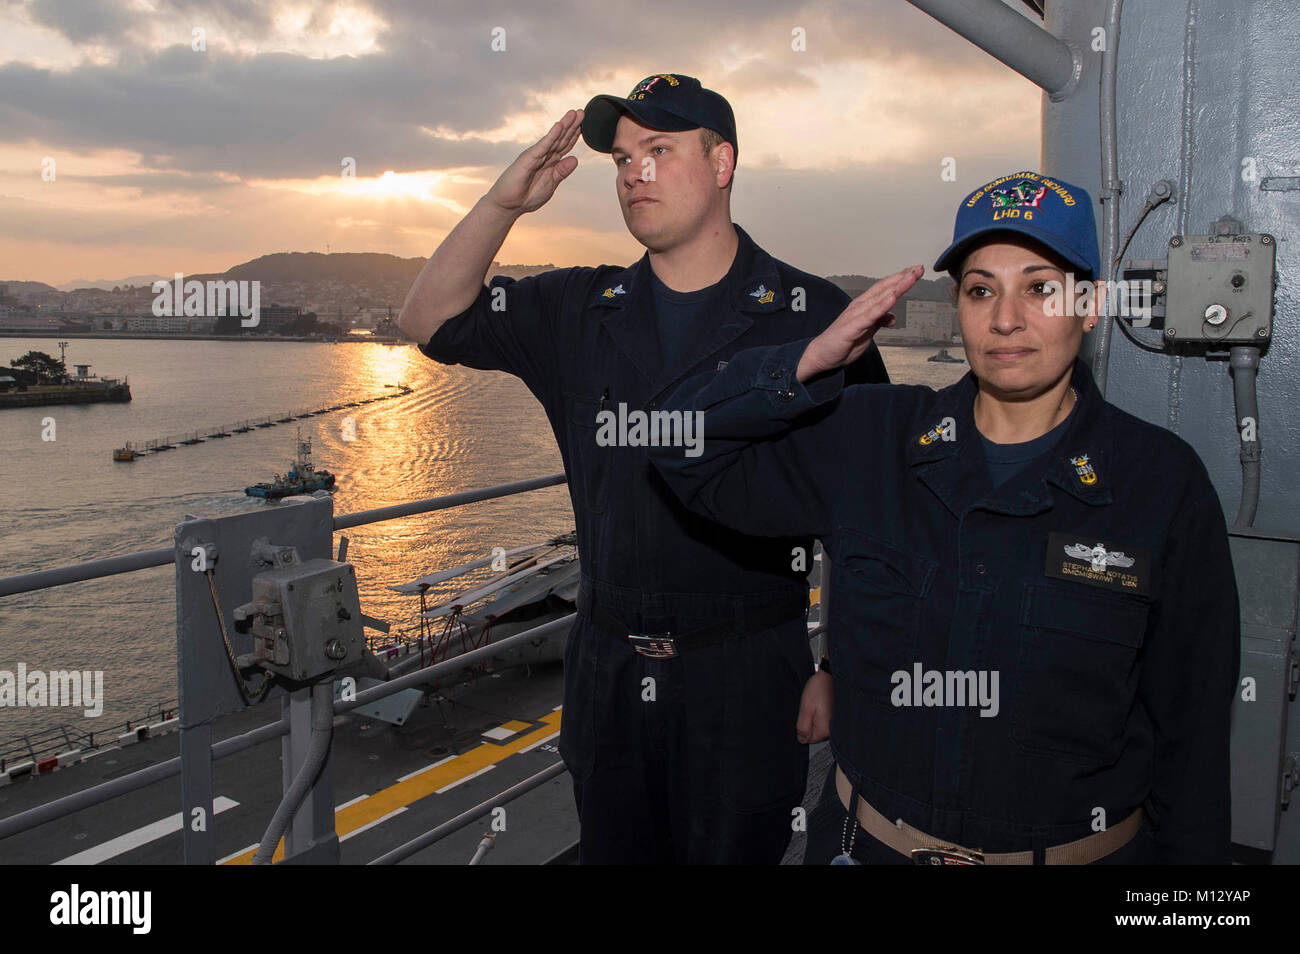 SASEBO, Japan (Jan. 23, 2018) Master Chief Quartermaster Stephanie Kortatis, right, from Sayreville, N.J., and Quartermaster 1st Class Matthew Lenerville, from Richardton, N.D., render honors during morning colors aboard the amphibious assault ship USS Bonhomme Richard (LHD 6) prior to the ship’s departure from Sasebo, Japan. Bonhomme Richard is underway conducting a Readiness for Sea assessment ahead of a regularly scheduled patrol in the Indo-Asia-Pacific region. (U.S. Navy Stock Photo